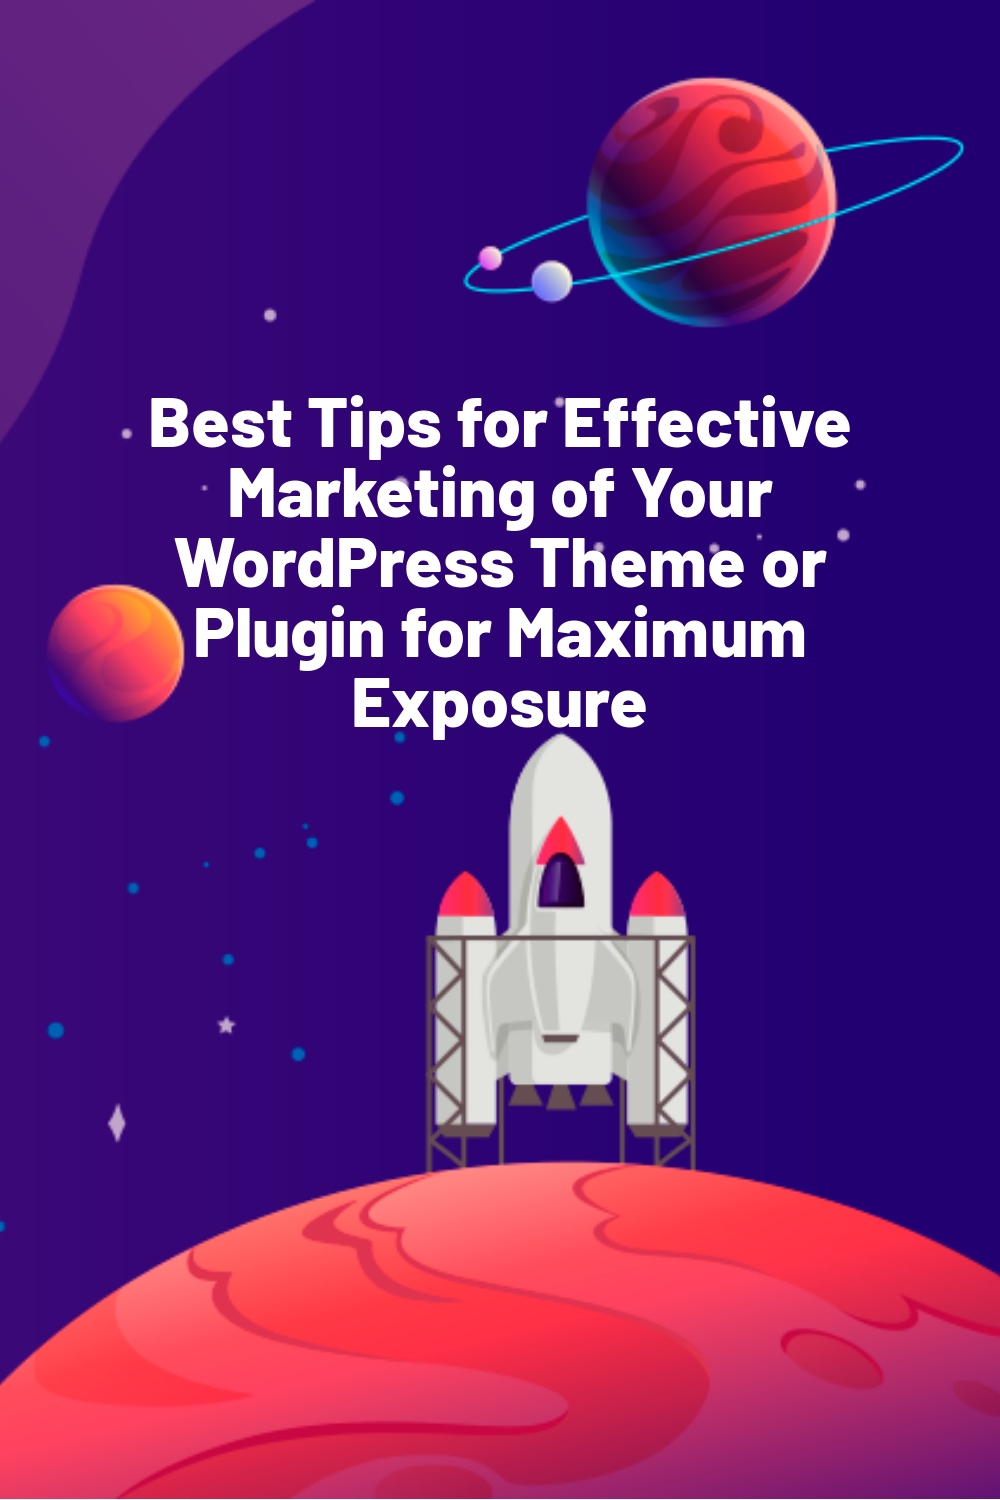 Best Tips for Effective Marketing of Your WordPress Theme or Plugin for Maximum Exposure